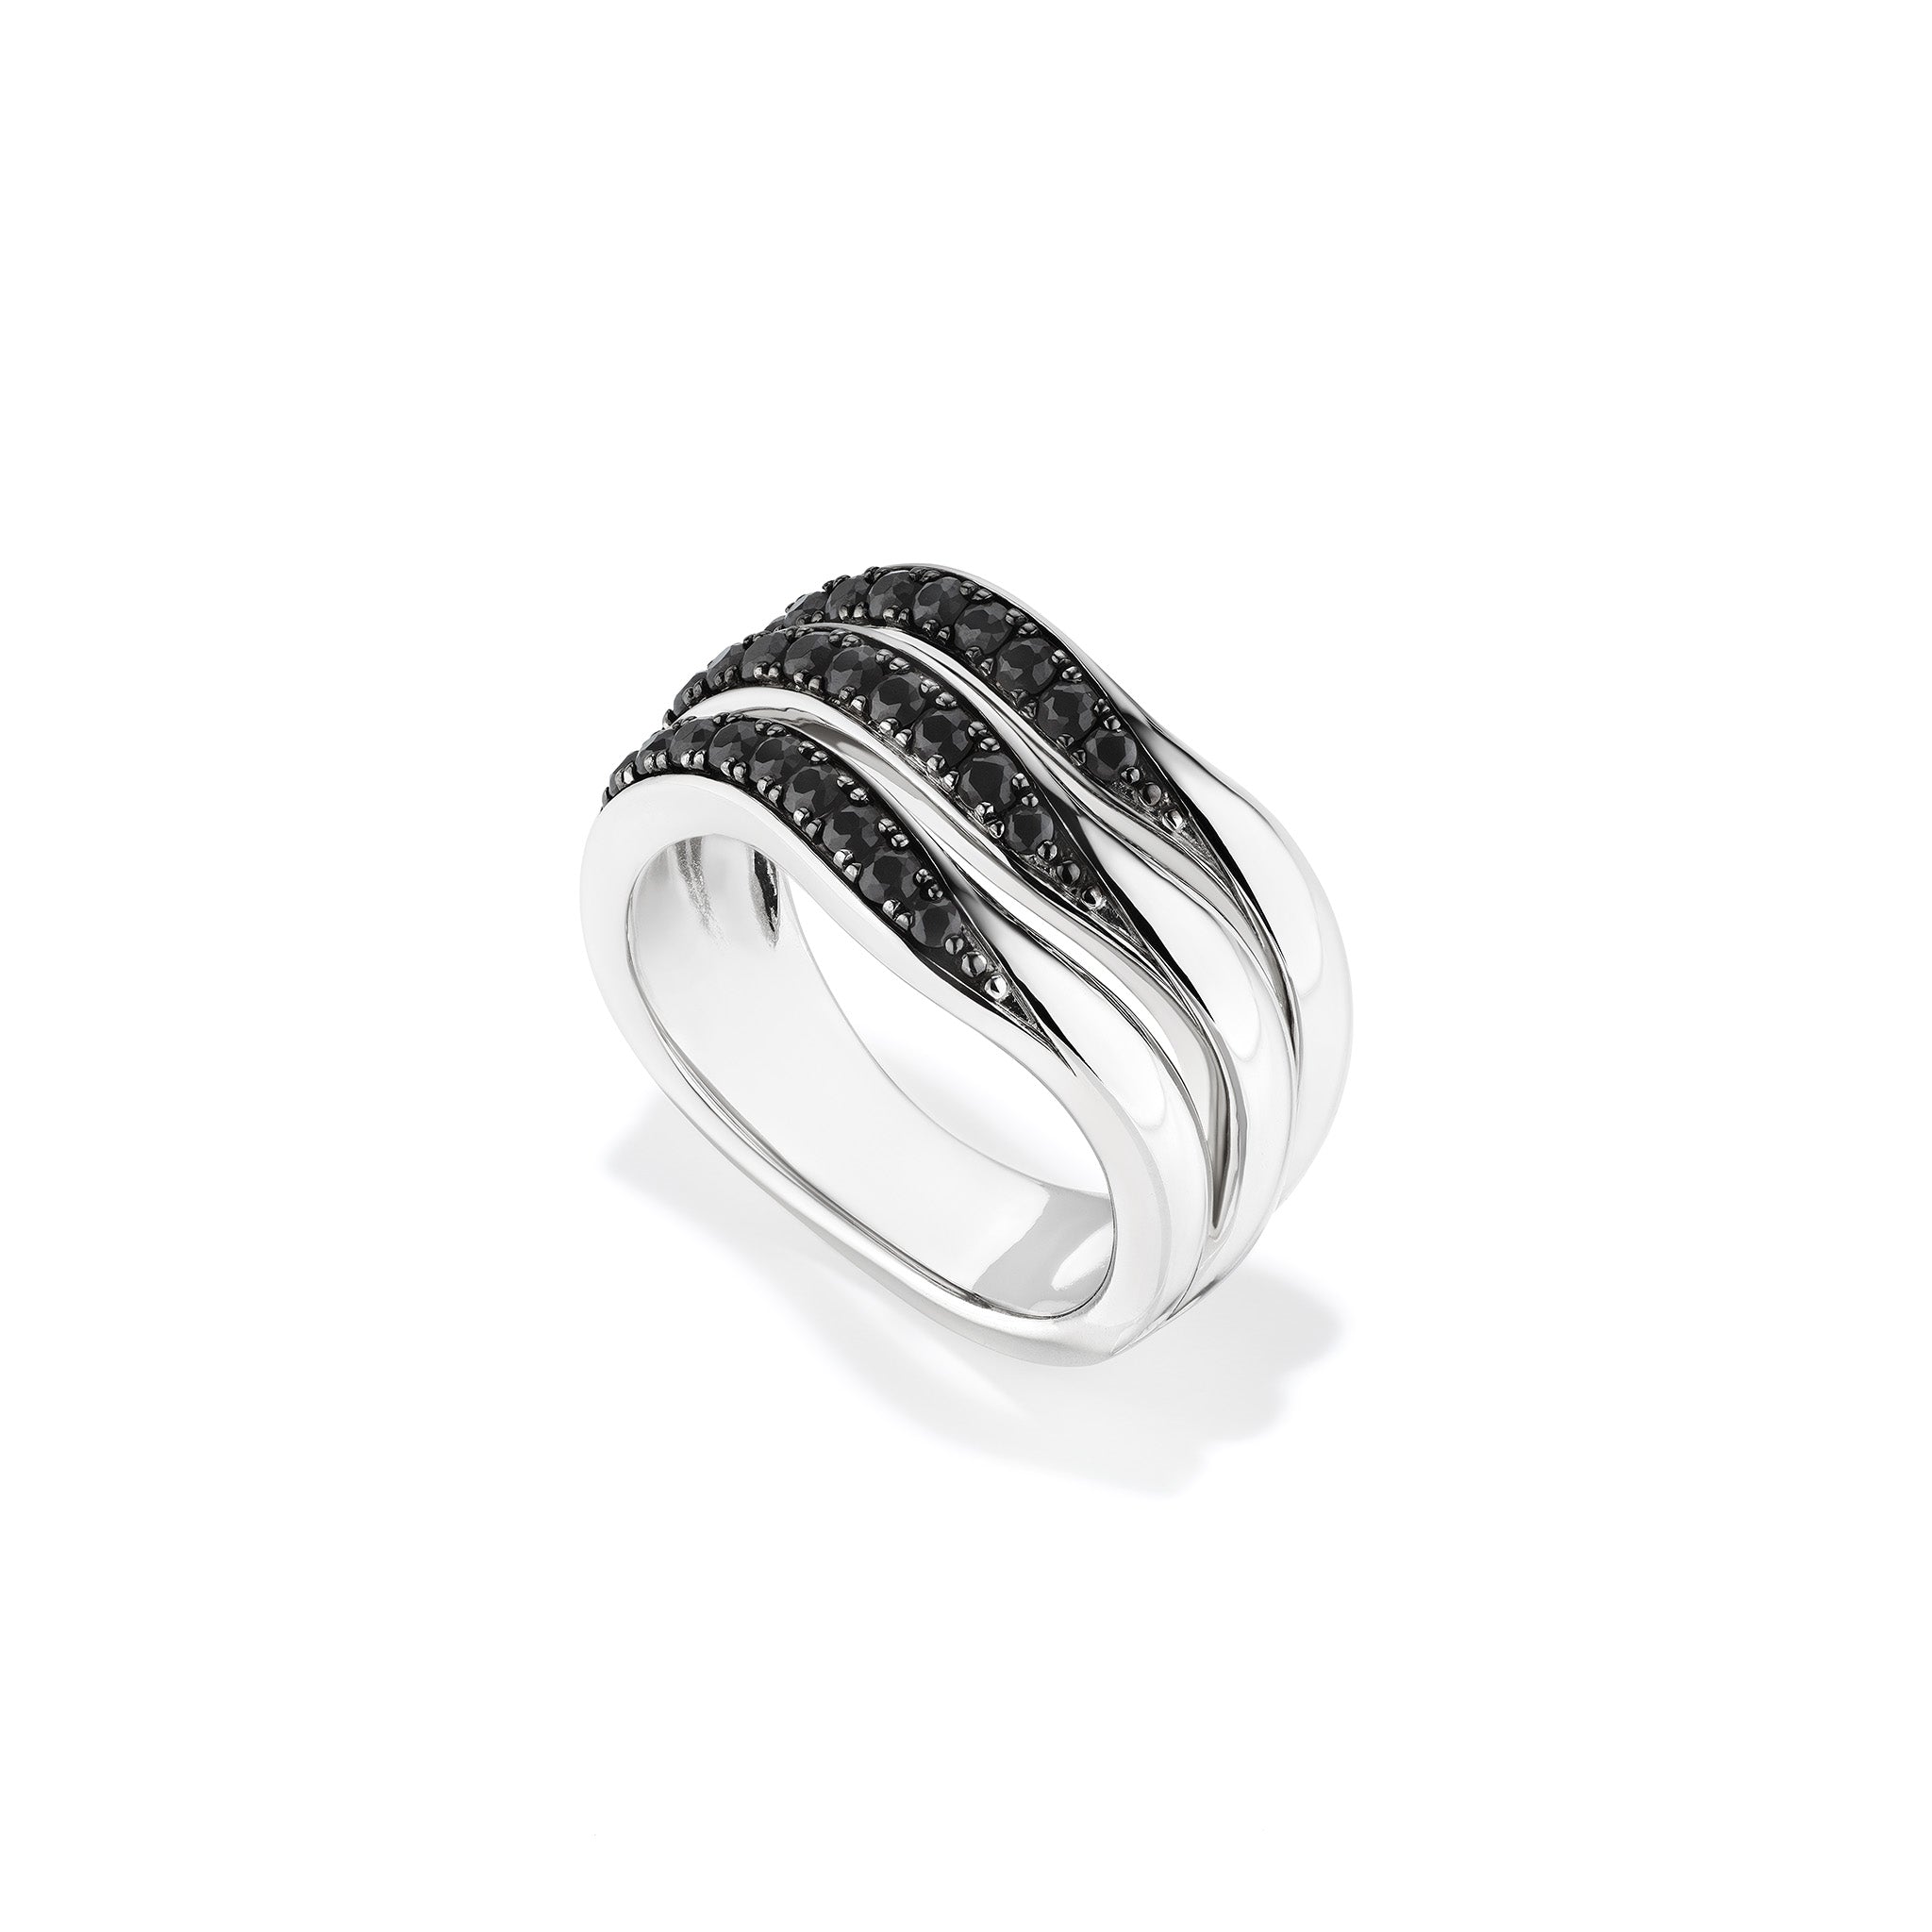 Nova Three Band Ring with Black Spinel